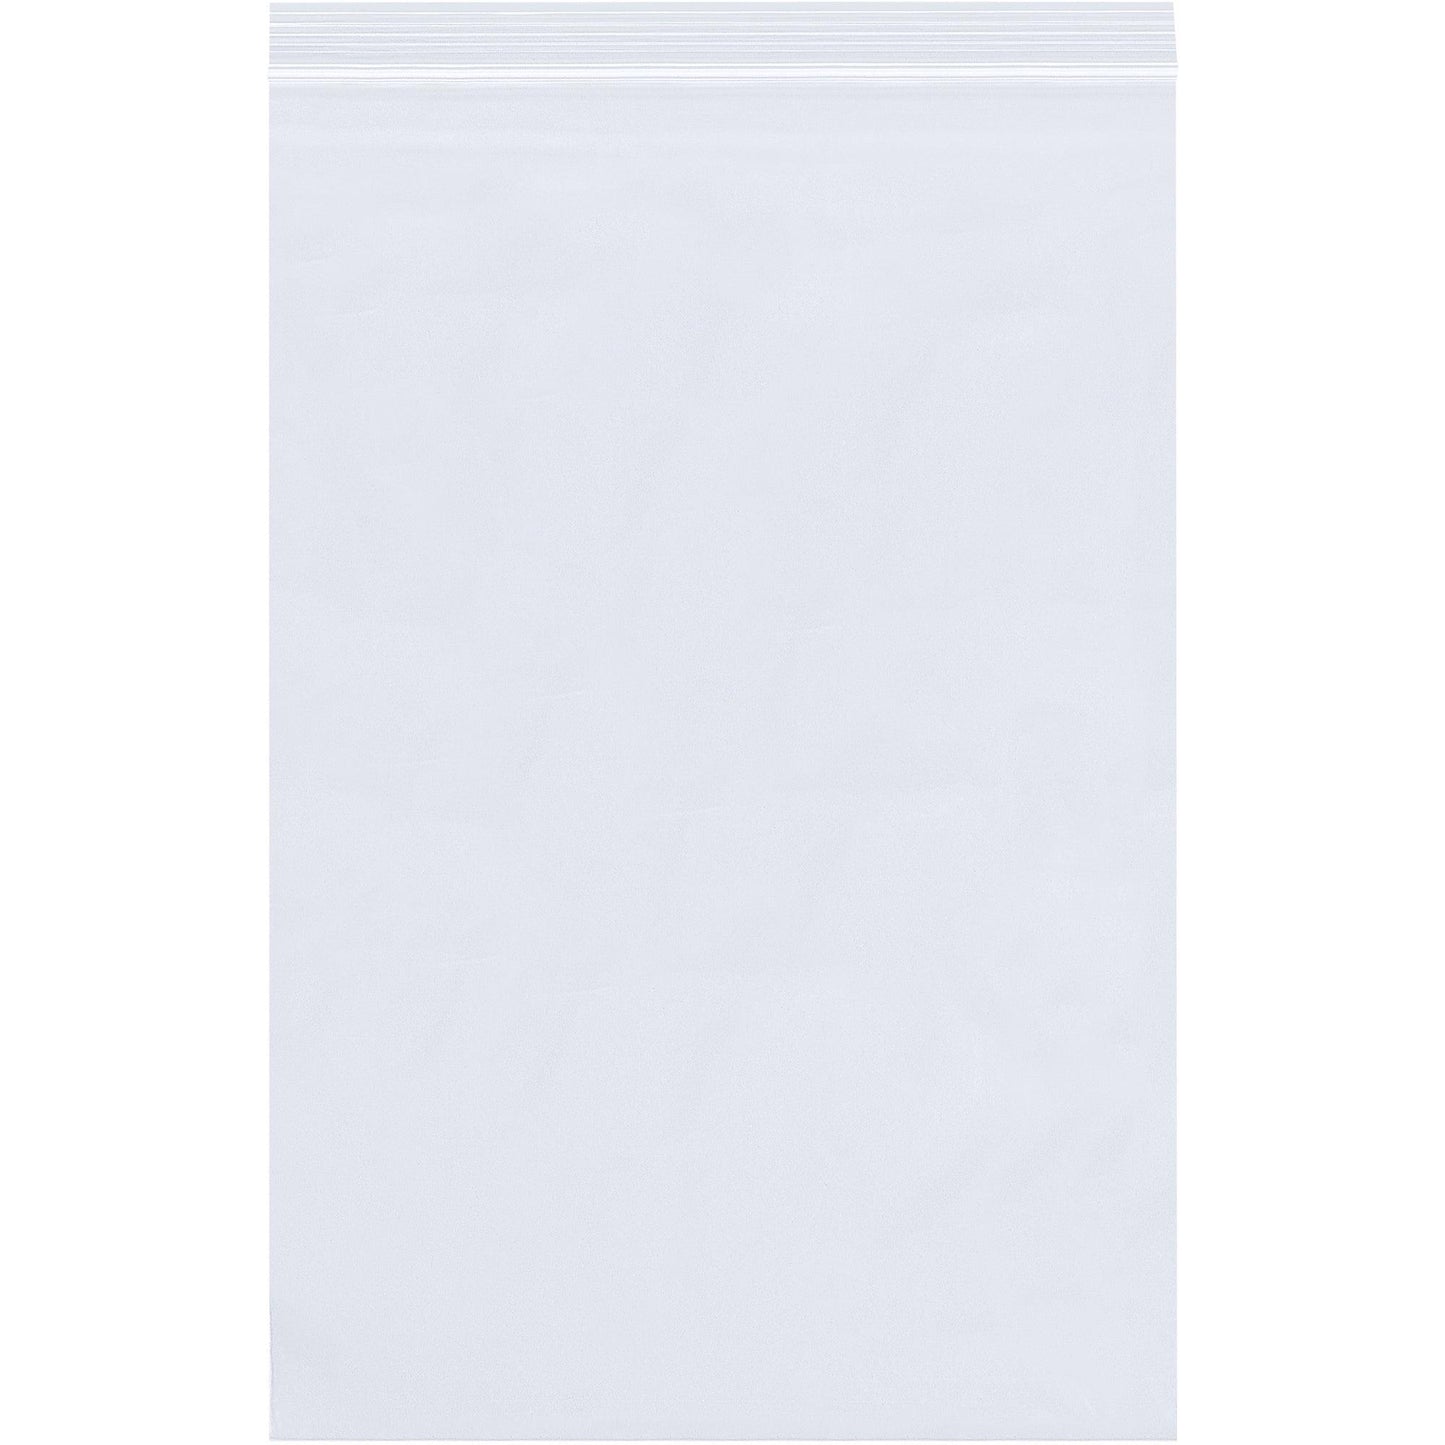 8 x 18" - 8 Mil Reclosable Poly Bags - PB4054